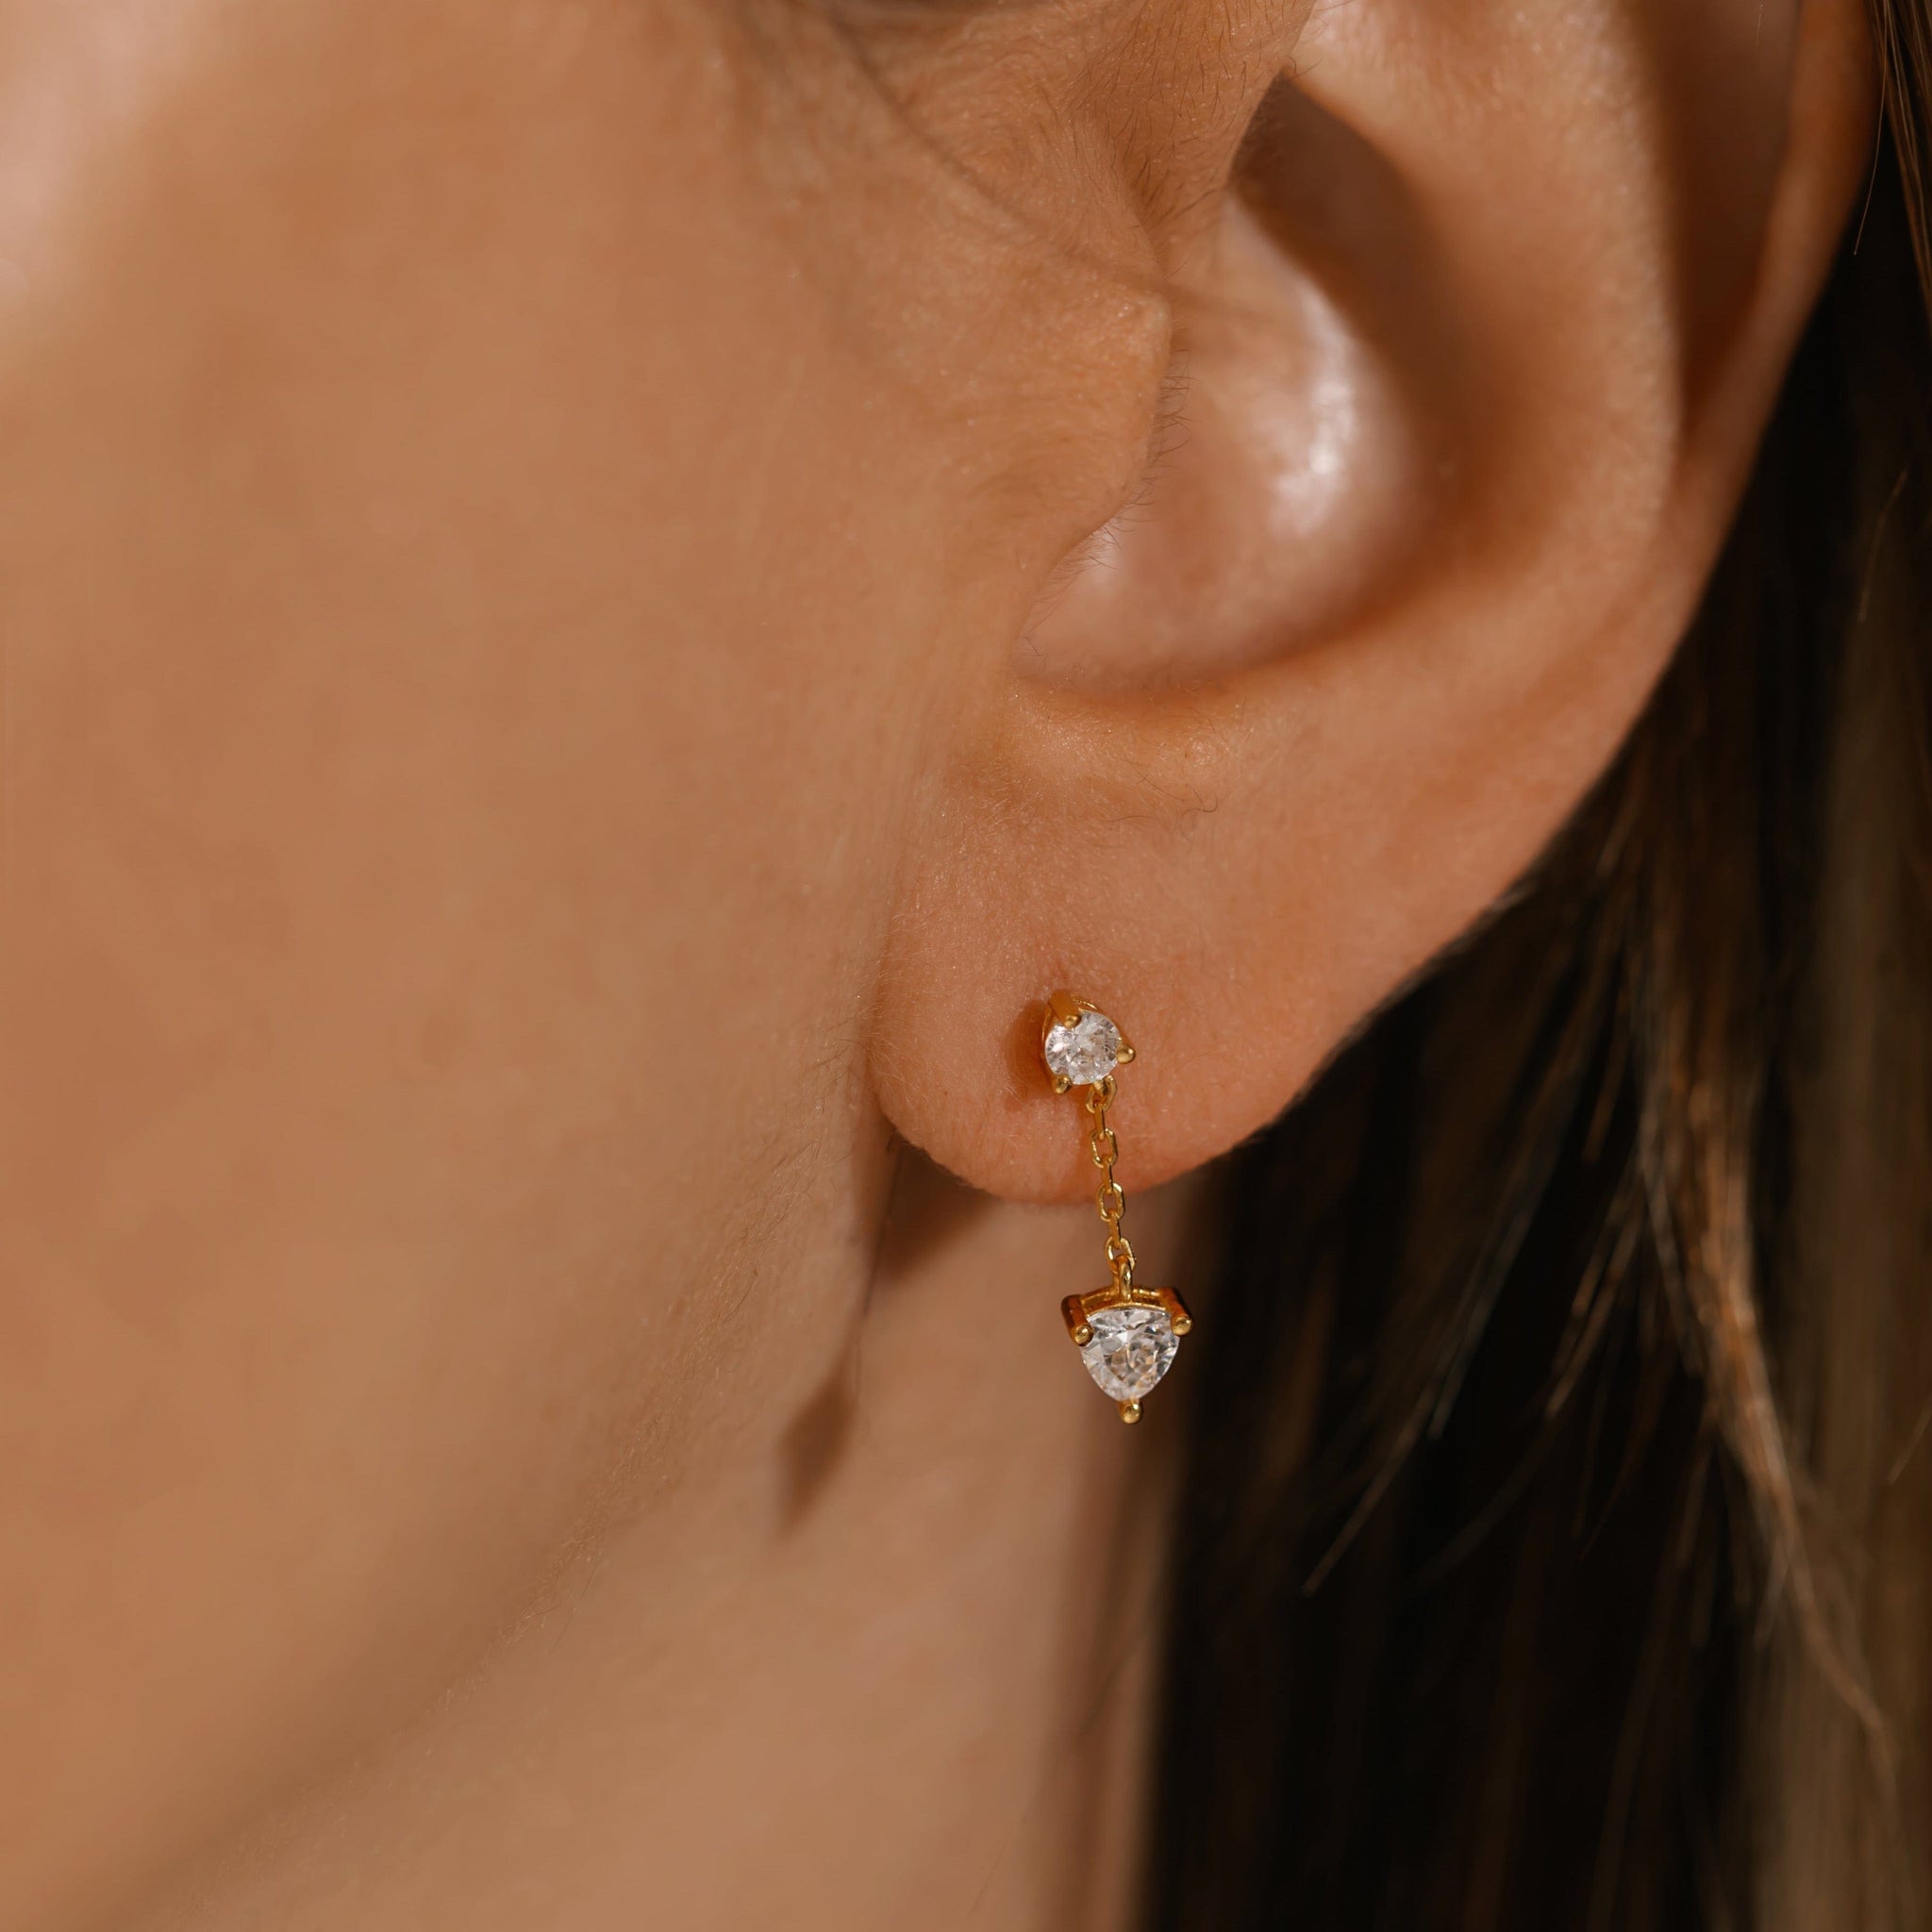 A close-up view of the Scintilla Chain Drop earring on the model's ear, the larger crystal charm dangling from the smaller crystal stud as they are connected by a thin golden chain. 